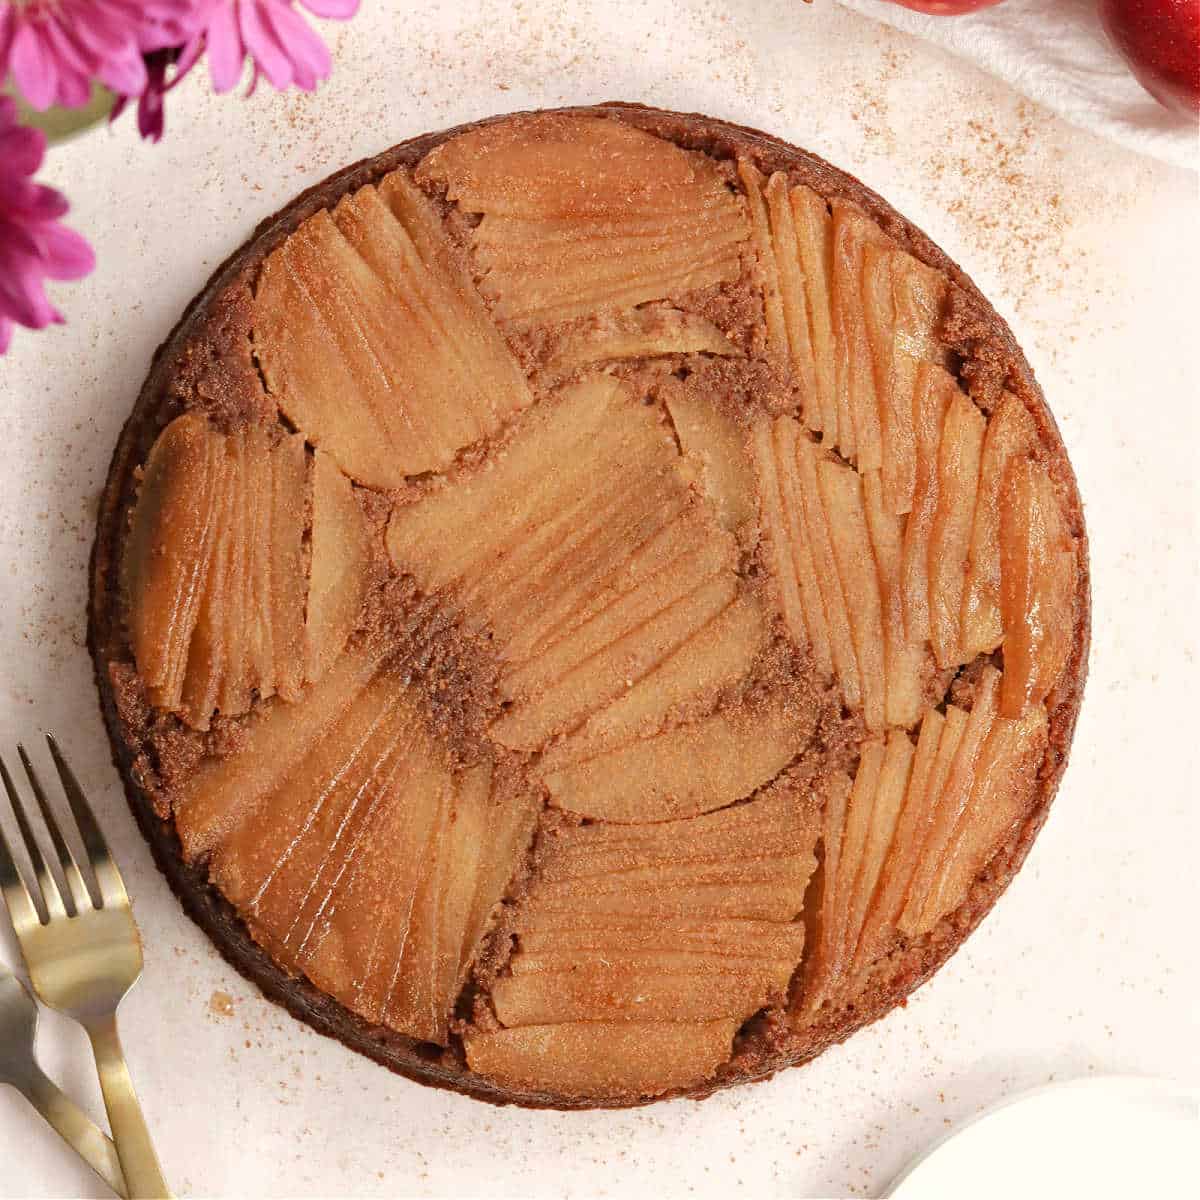 A paleo apple cake on a table surrounded by a couple forks, flowers, and apples.